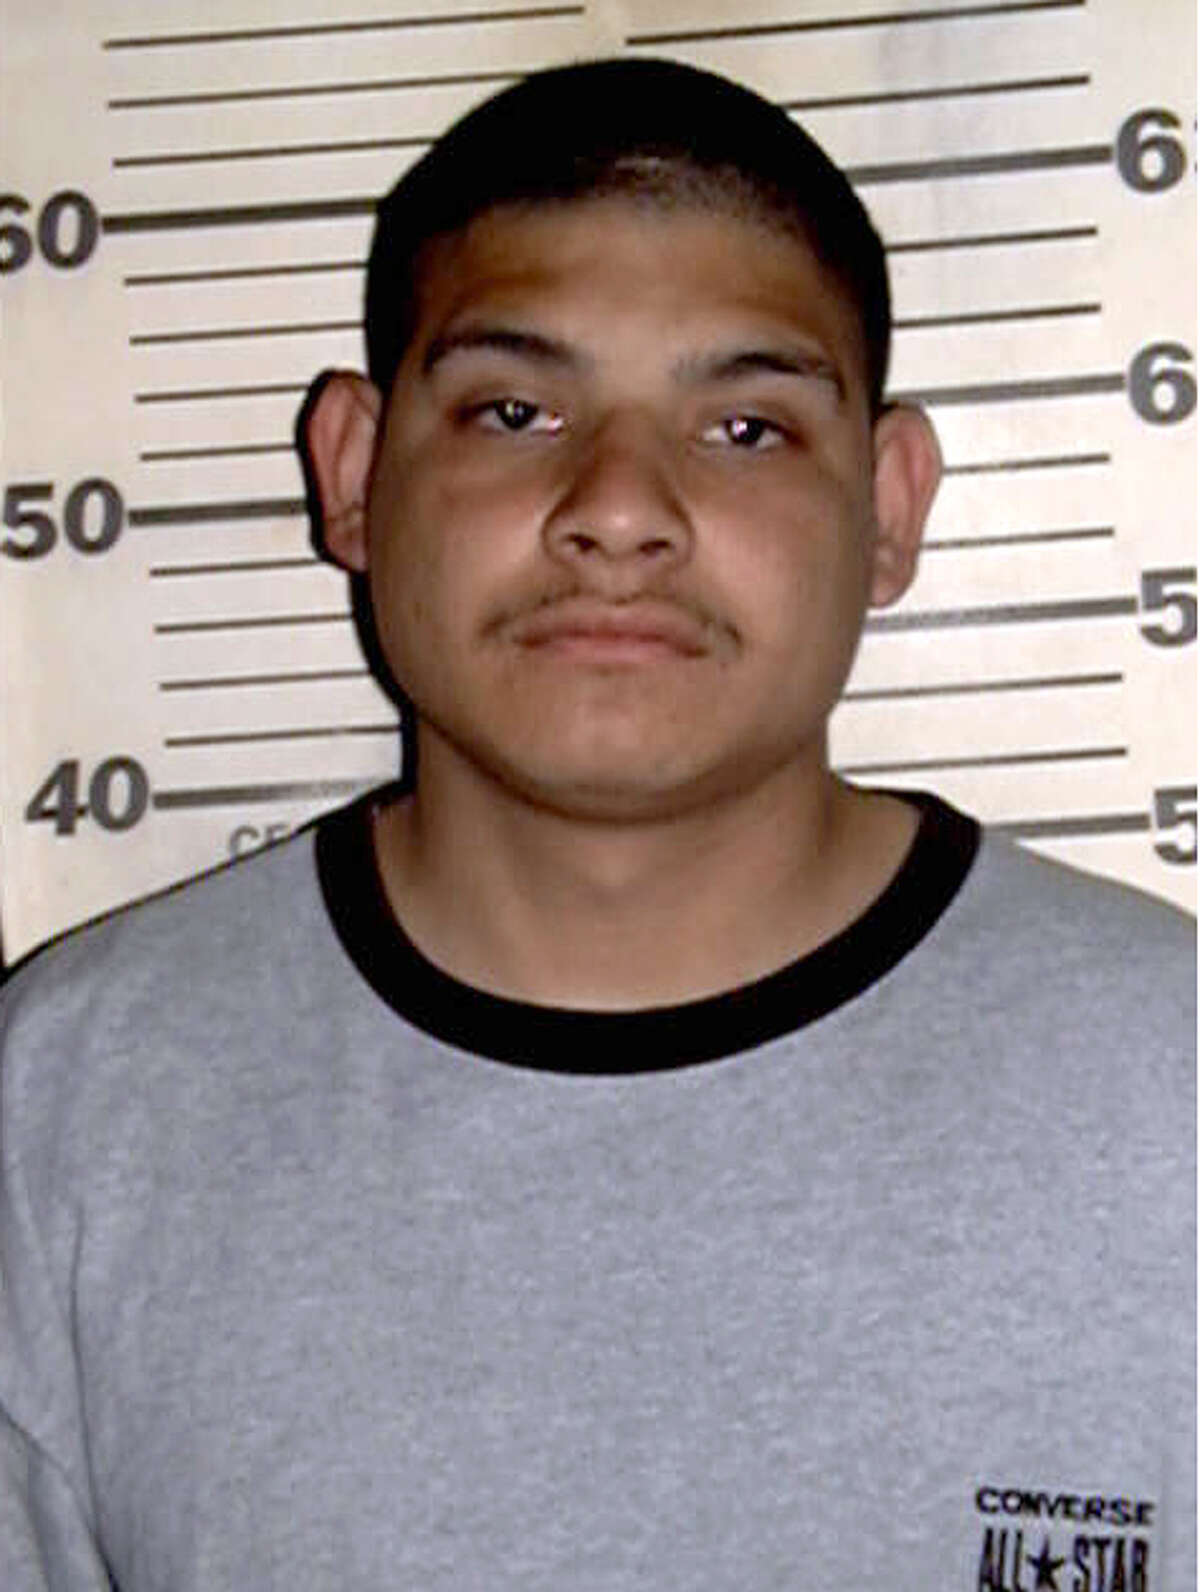 Joseph Gamboa Age entered death row: 24 Execution: Still on death row Summary: Gamboa was convicted of burglarizing a business and shooting and killing two men.